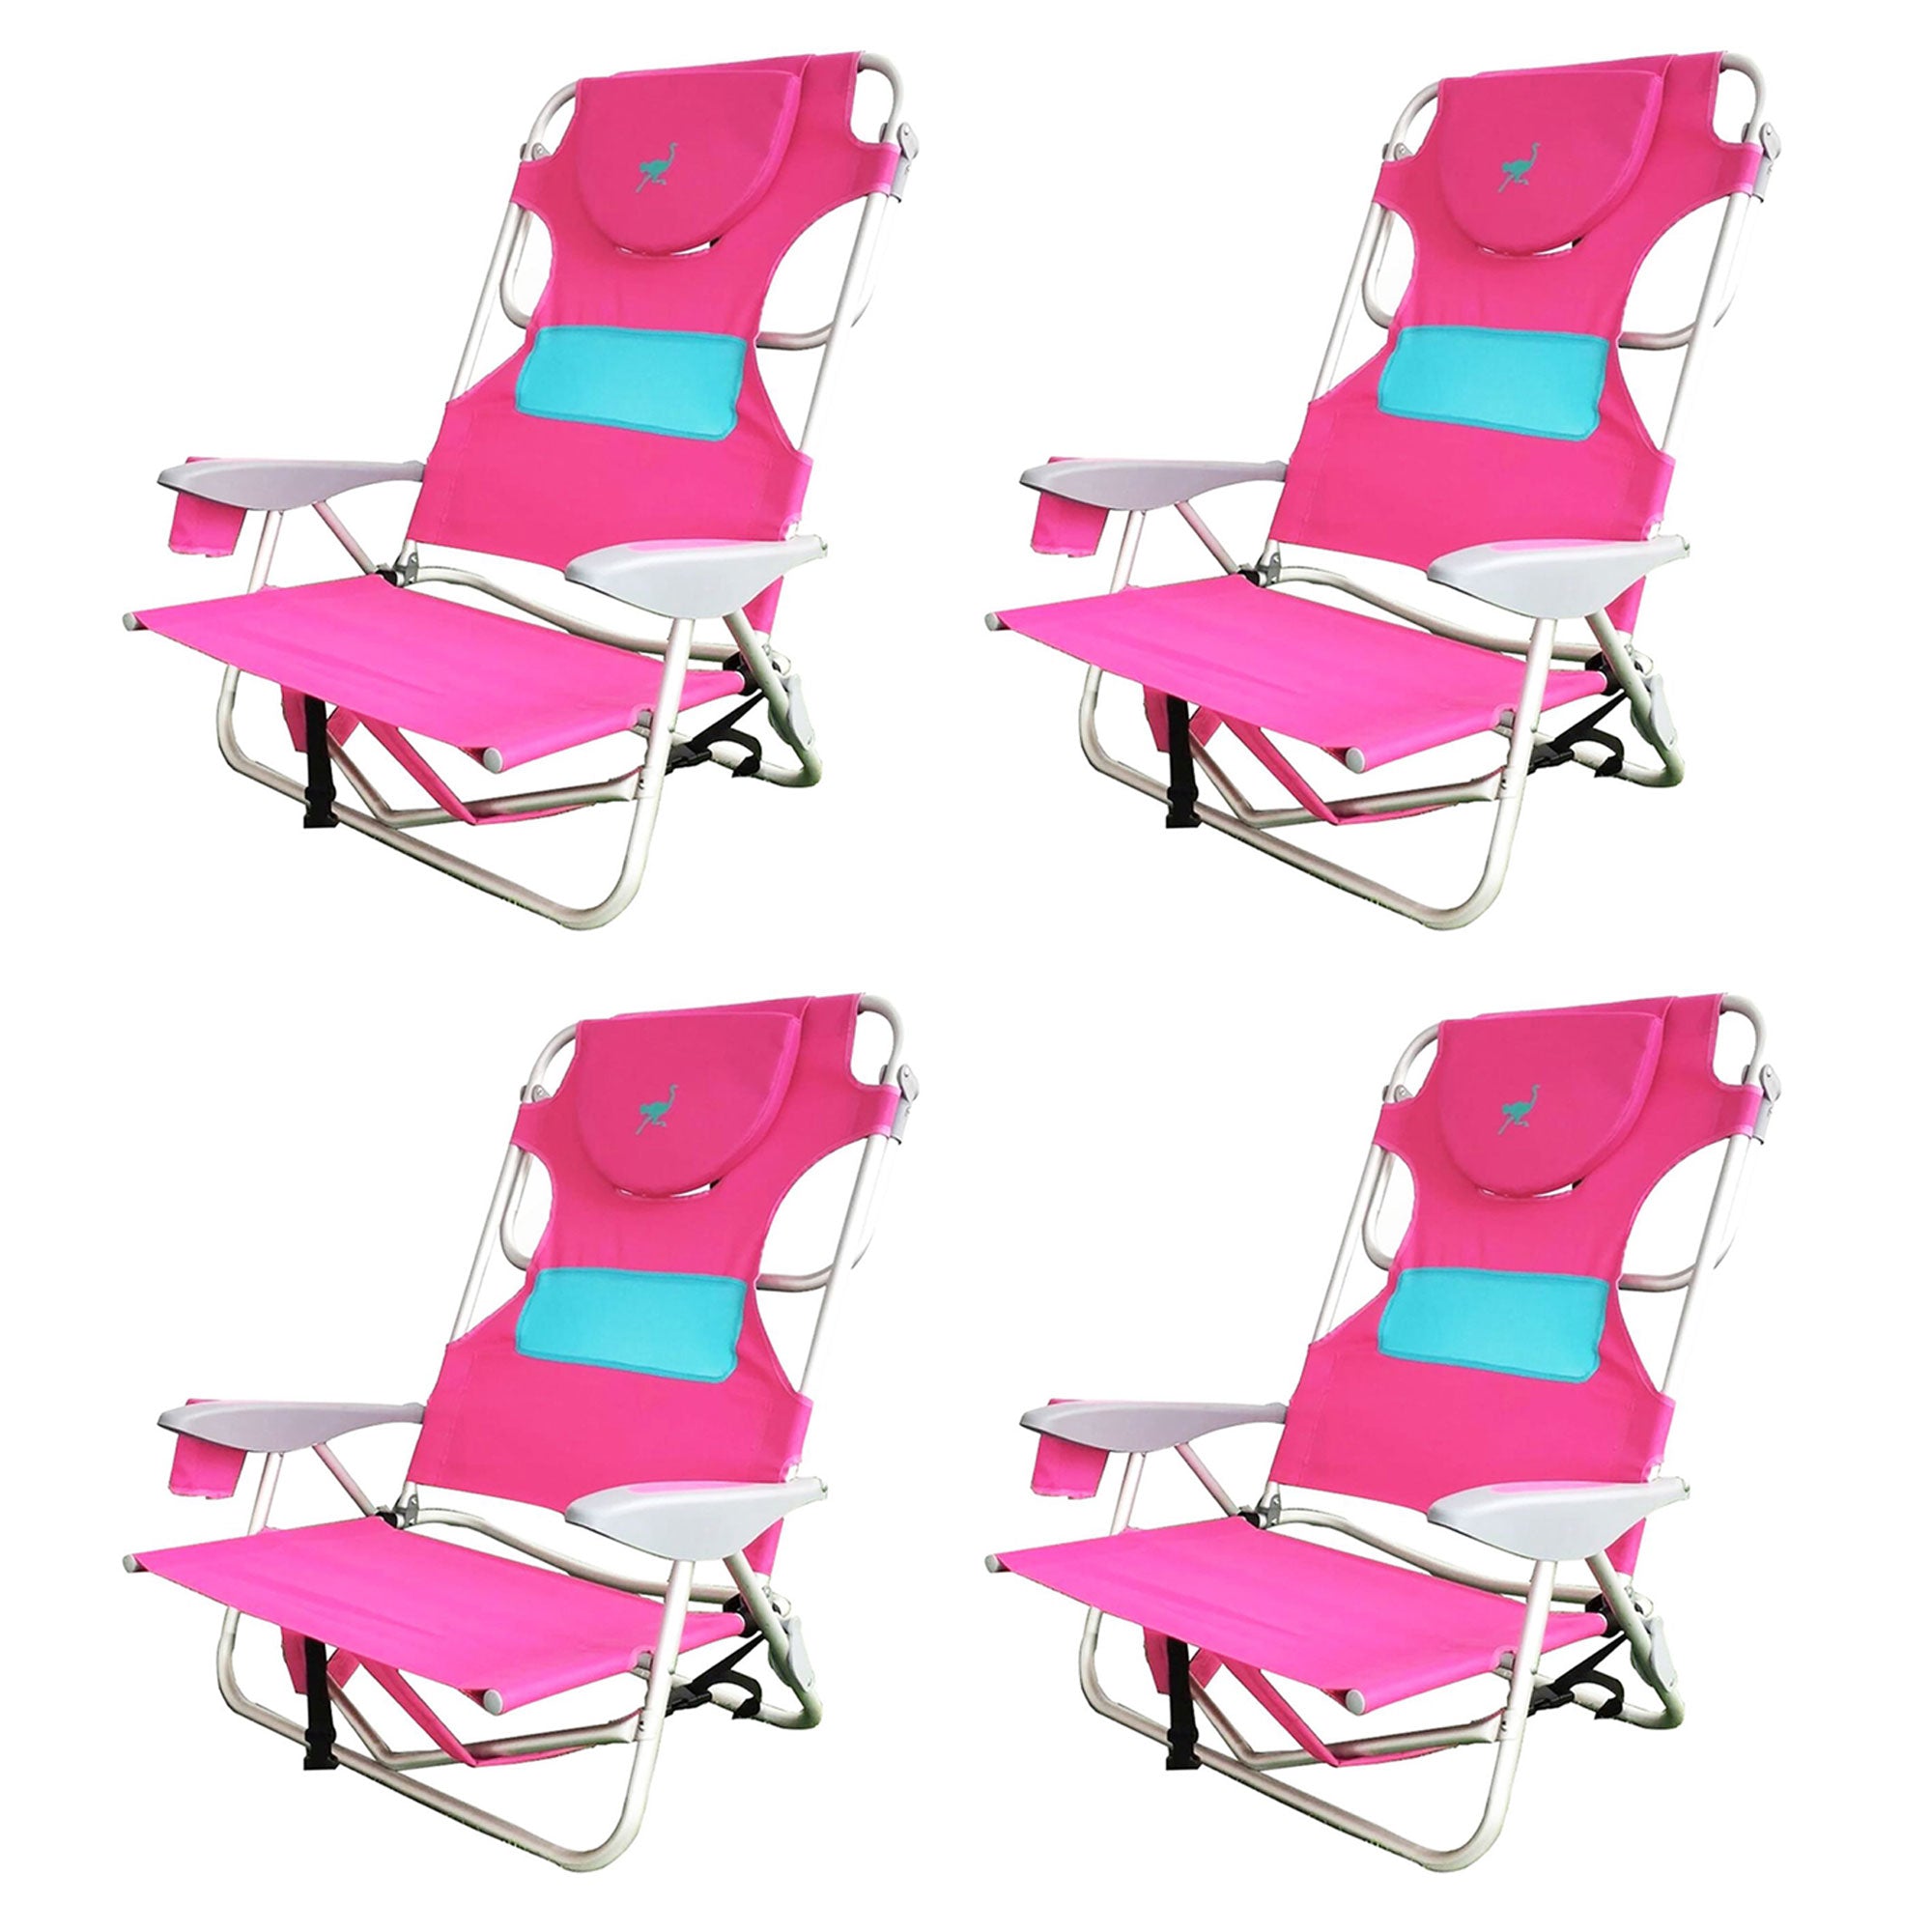 Ostrich-Outdoor-Beach-Ladies-Comfort-On-Your-Back-Beach-Chair,-Pink-(4-Pack)-Chairs-&-Seating